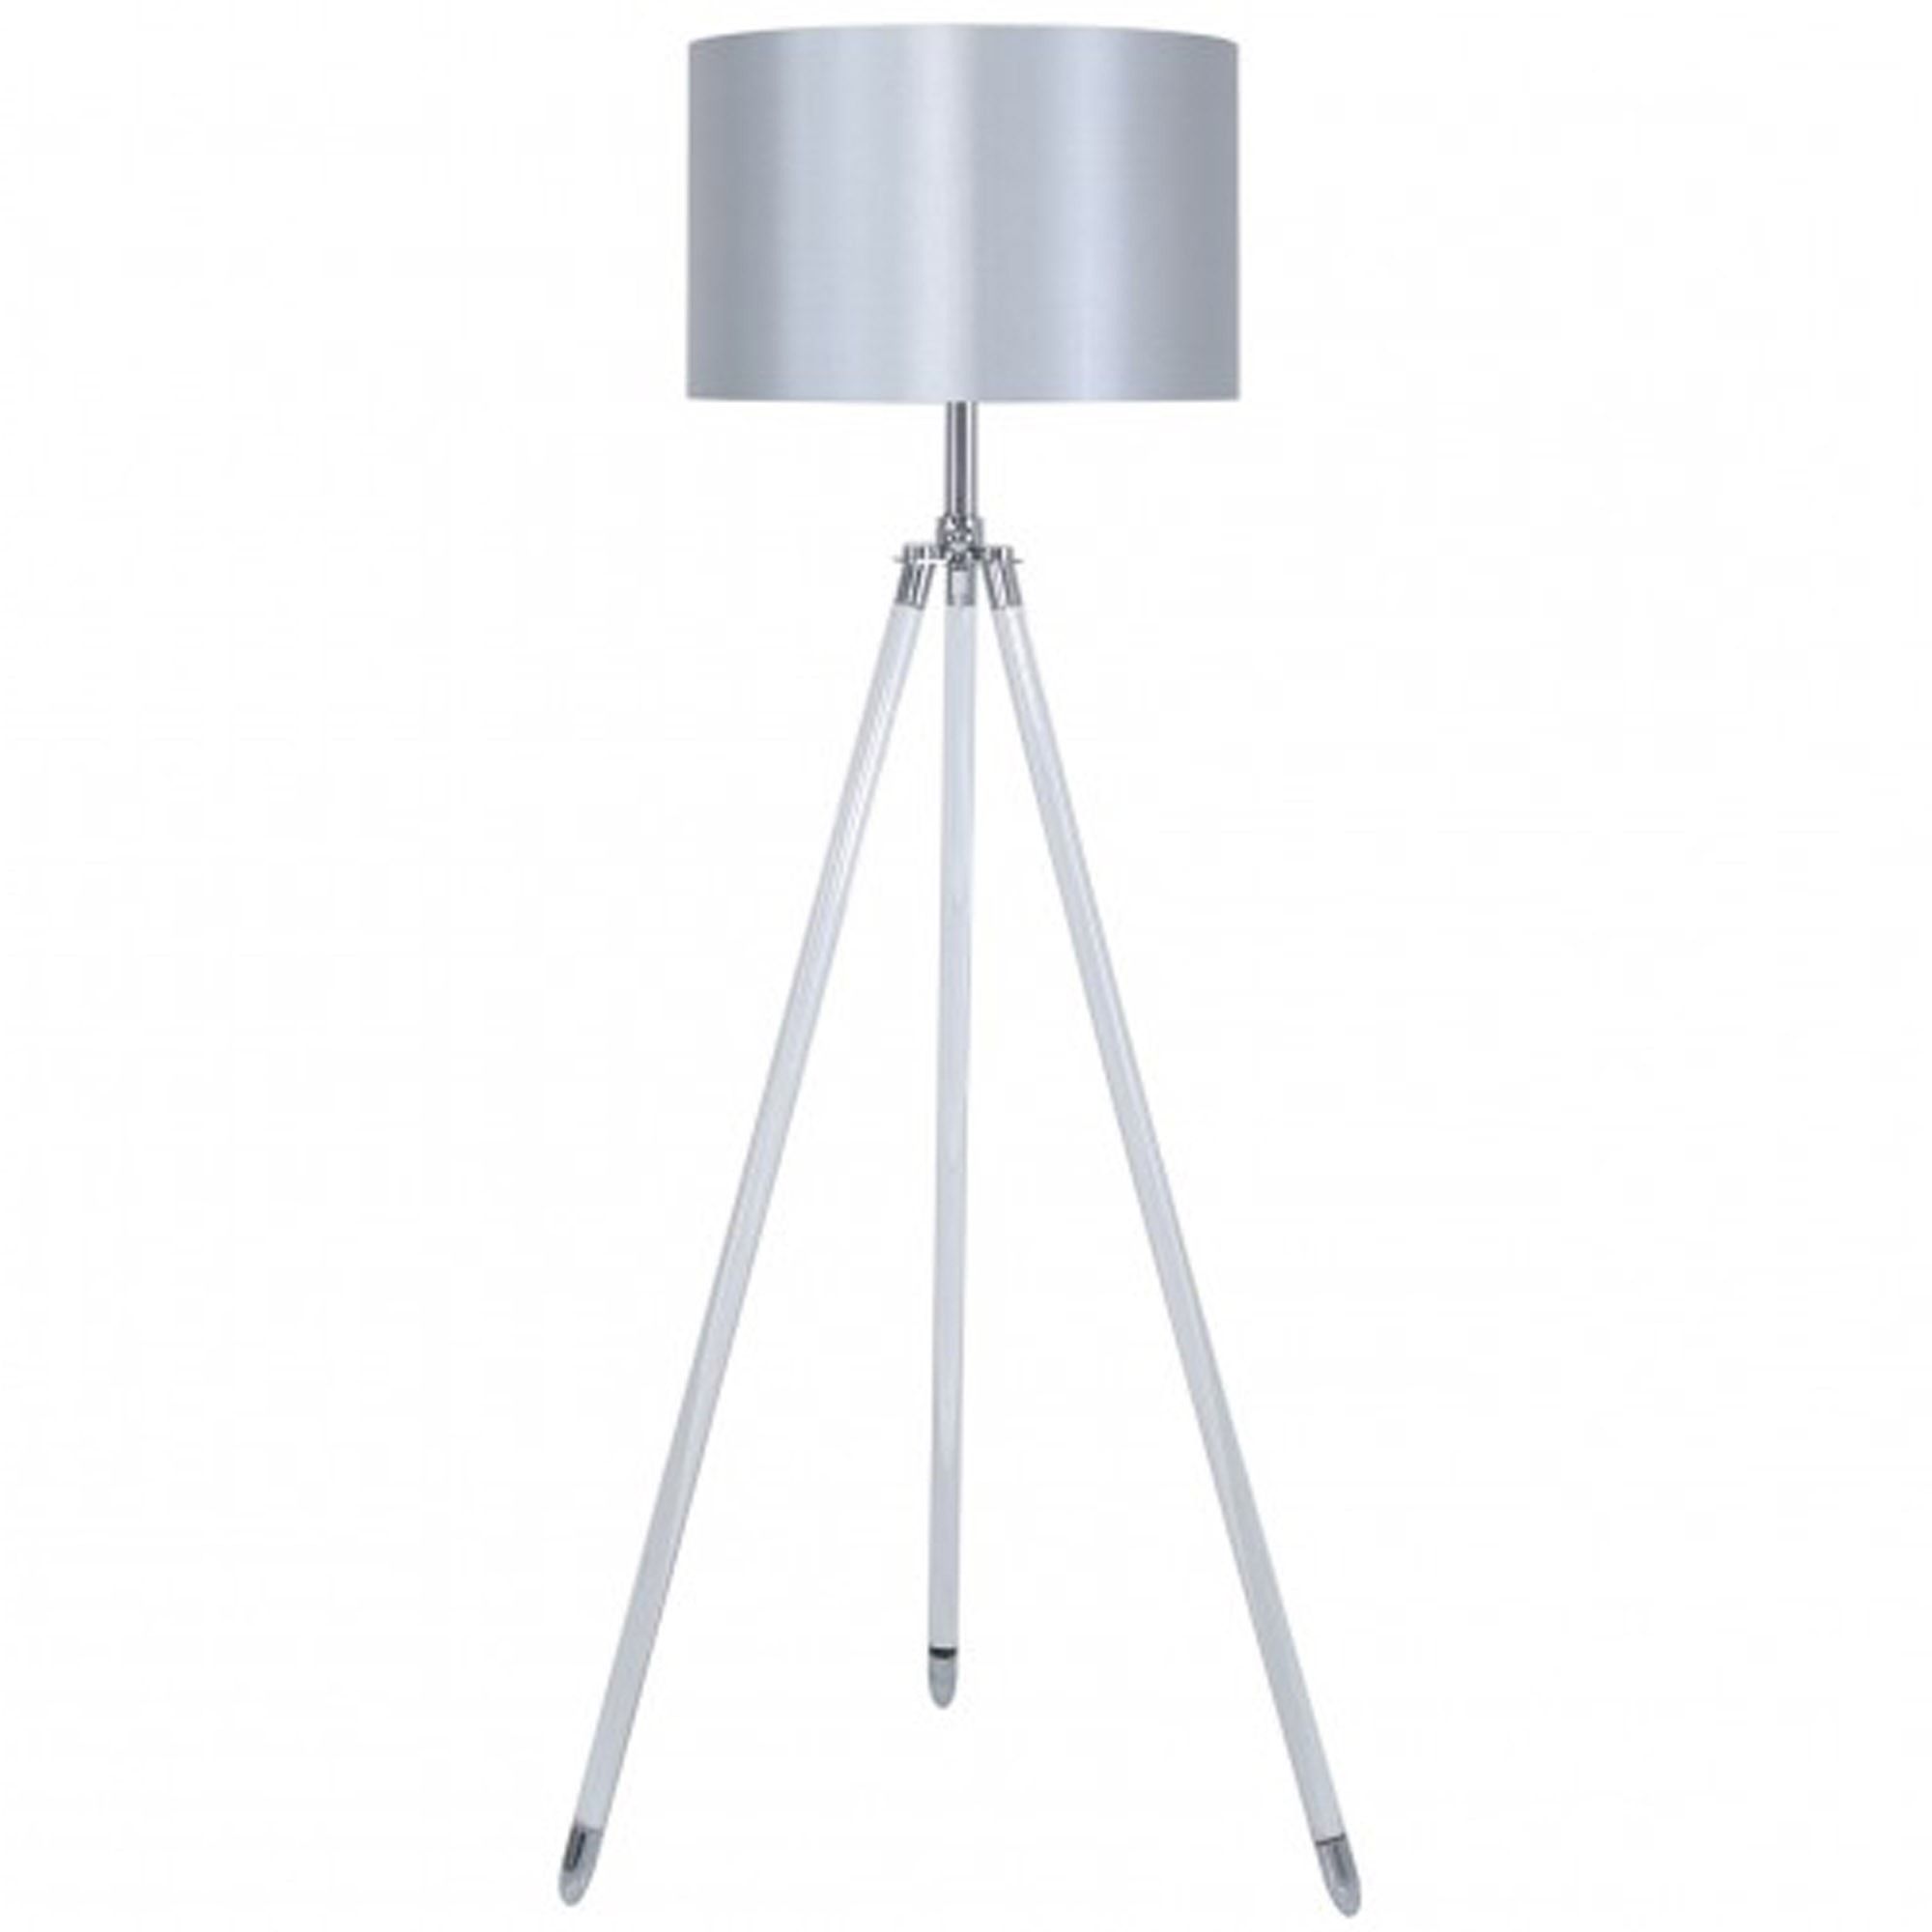 Floor Standing Lamps With Regard To Most Current Acrylic Standing Lamps (View 9 of 10)